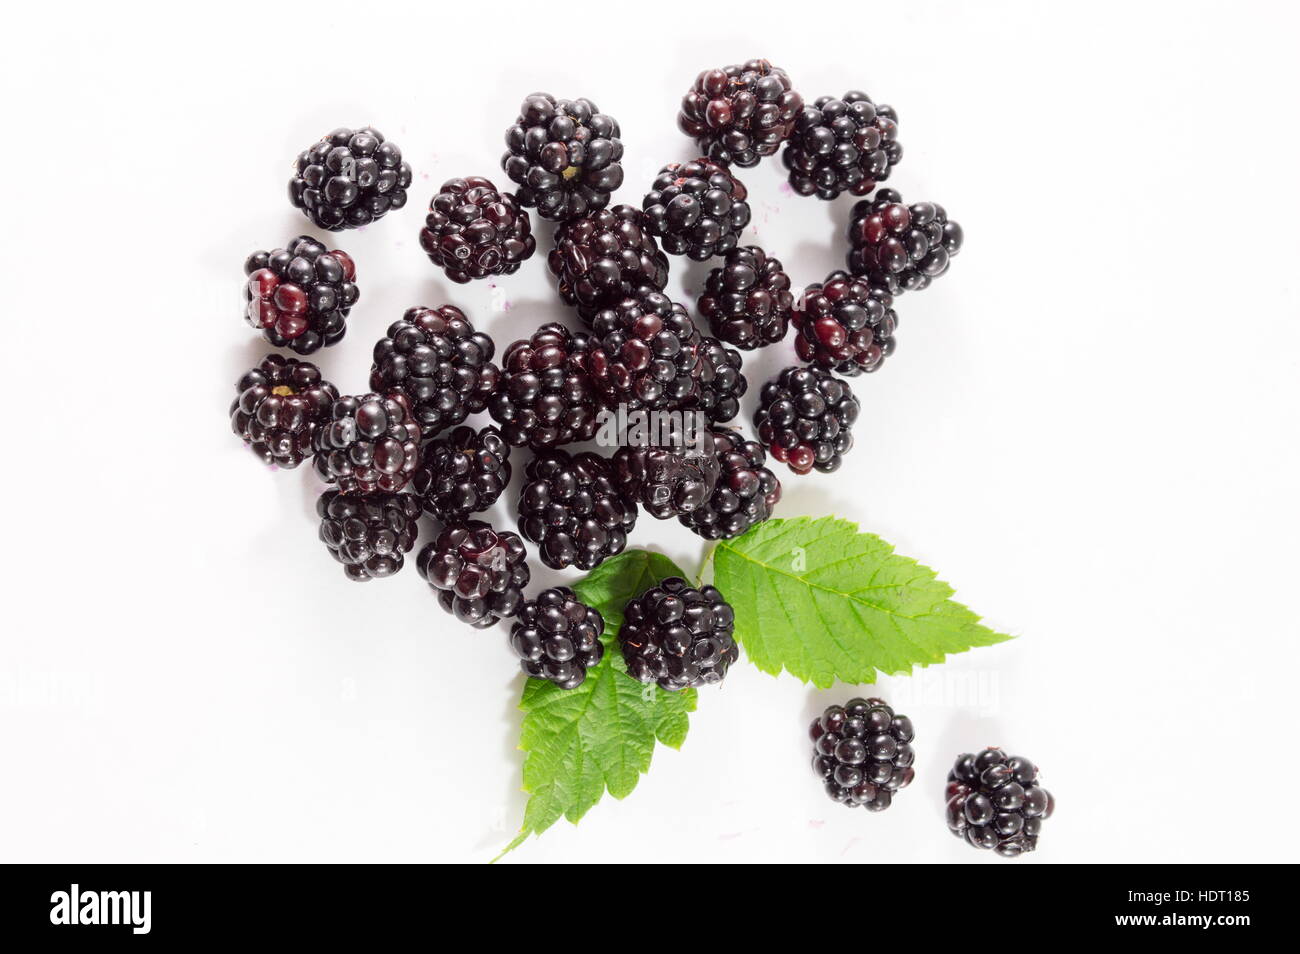 blackberries and green leaves on a white surface Stock Photo